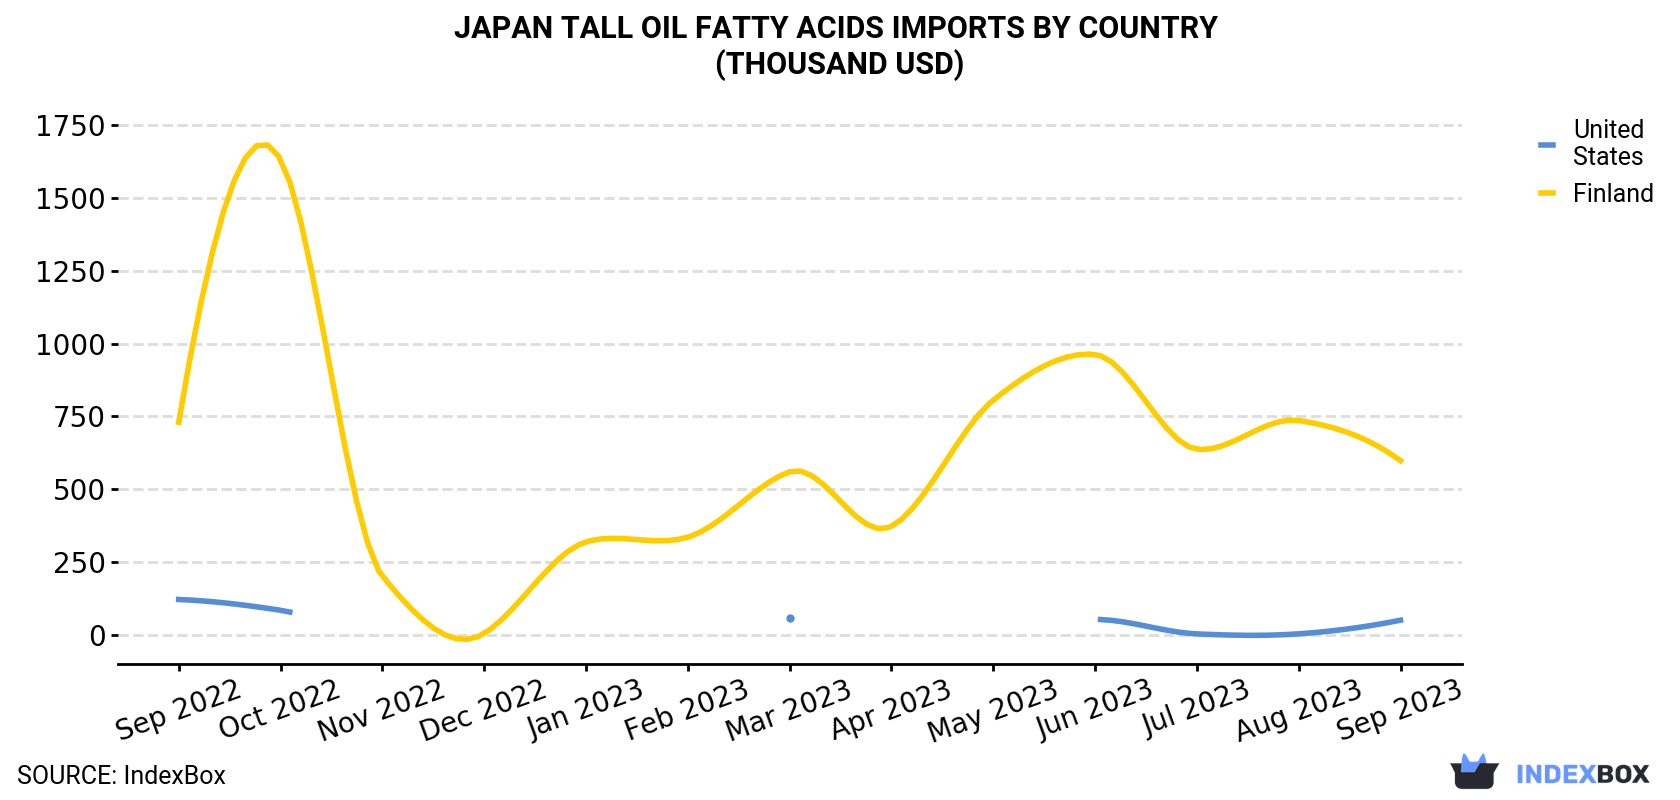 Japan Tall Oil Fatty Acids Imports By Country (Thousand USD)